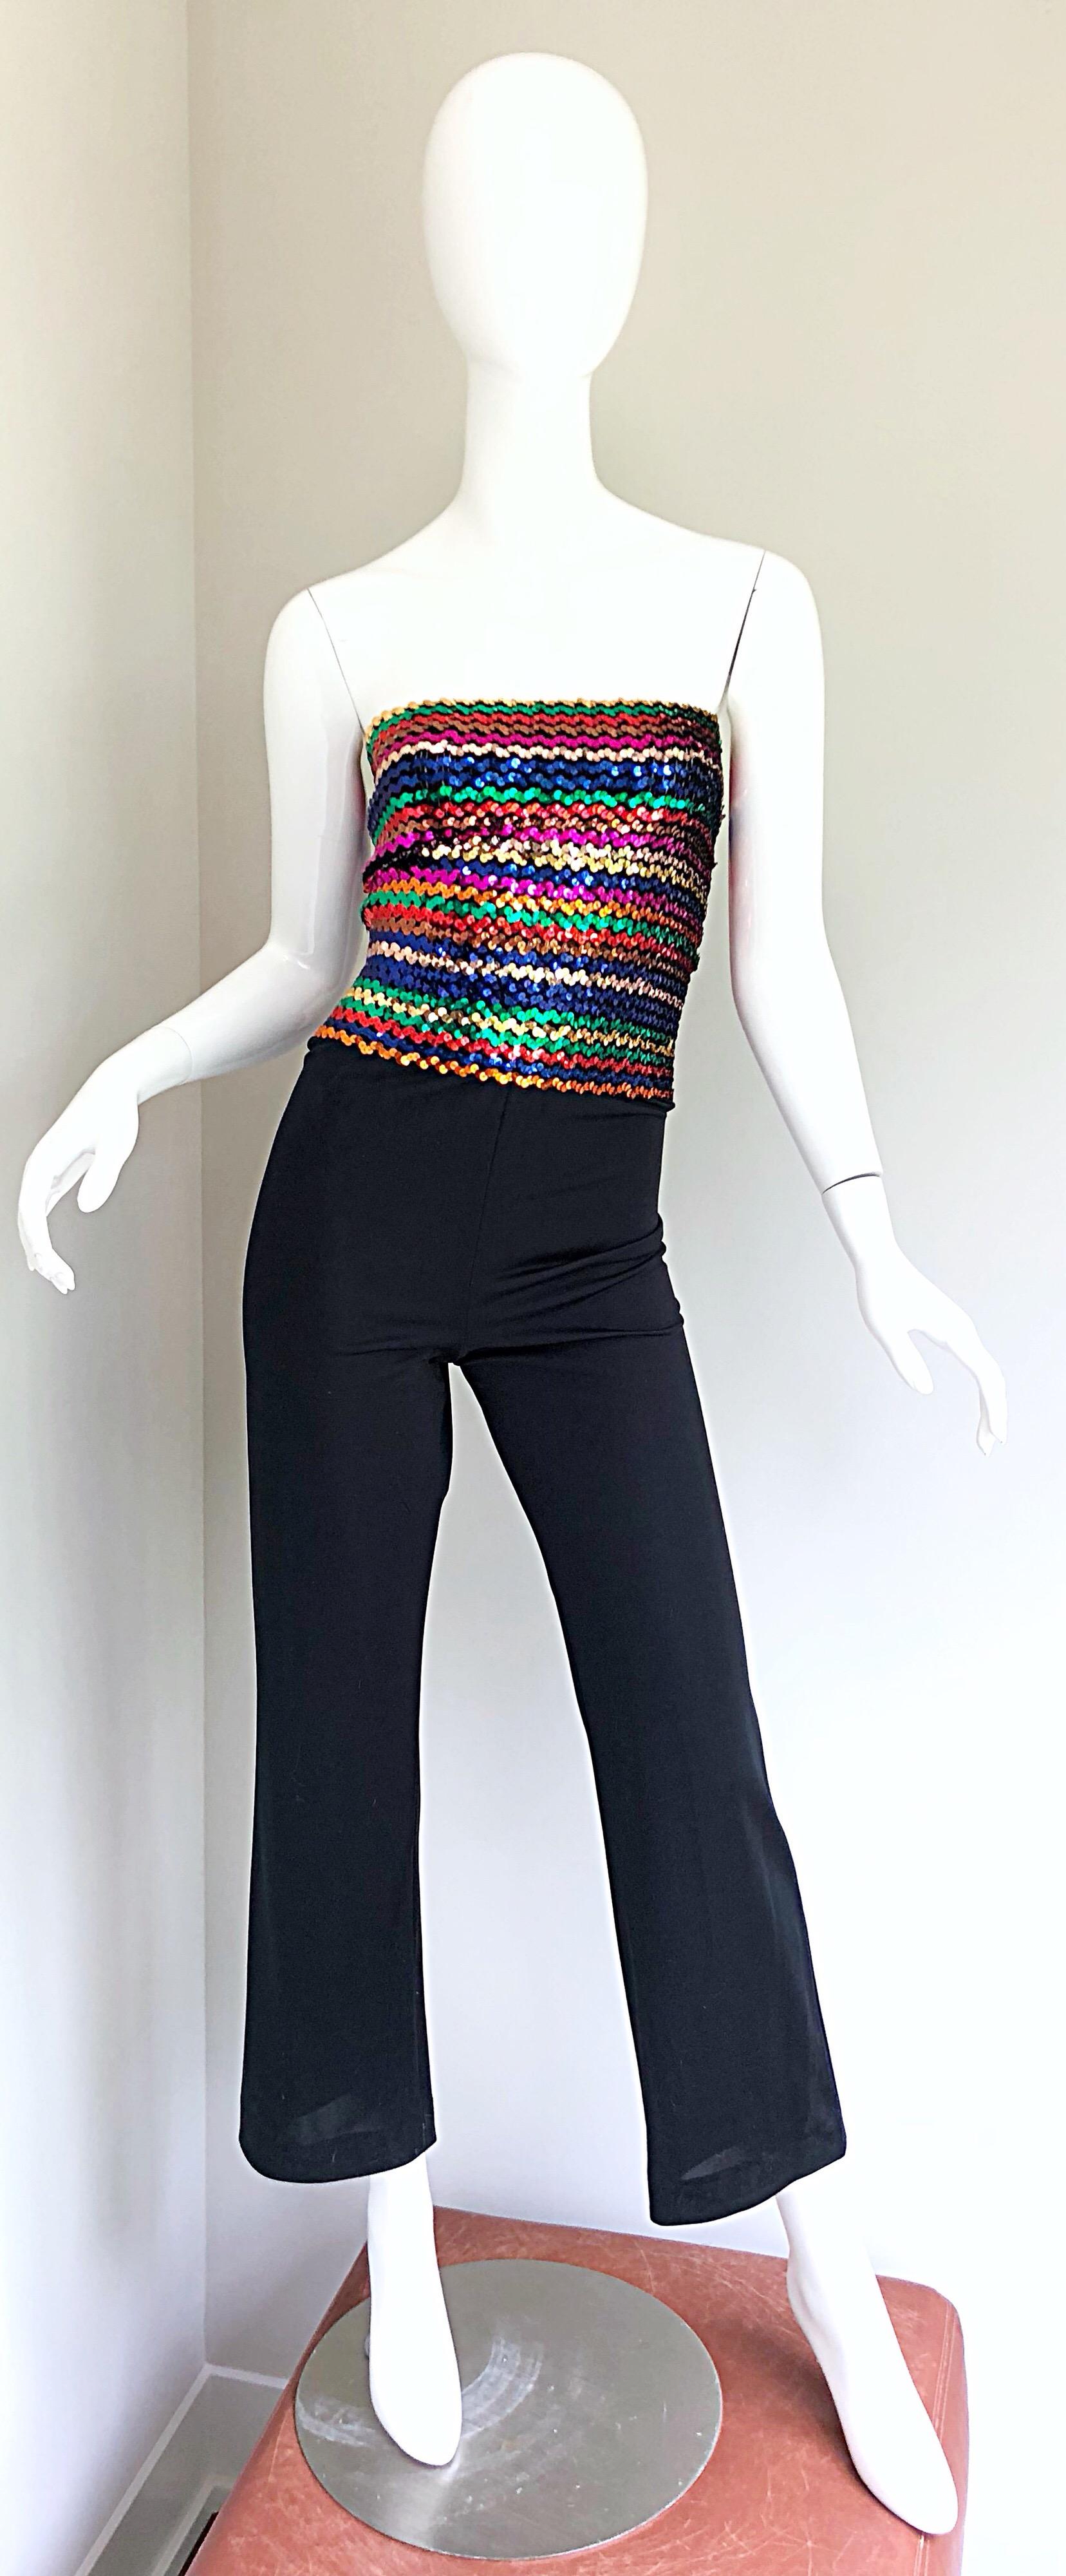 Amazing and sexy 1970s strapless rainbow sequined jumpsuit! Features hundreds of hand-sewn sequins on a soft knit. Vibrant rainbow colors of hot pink, blue, gold, green, purple, red, orange and bronze sequins. Solid black slightly flared jersey